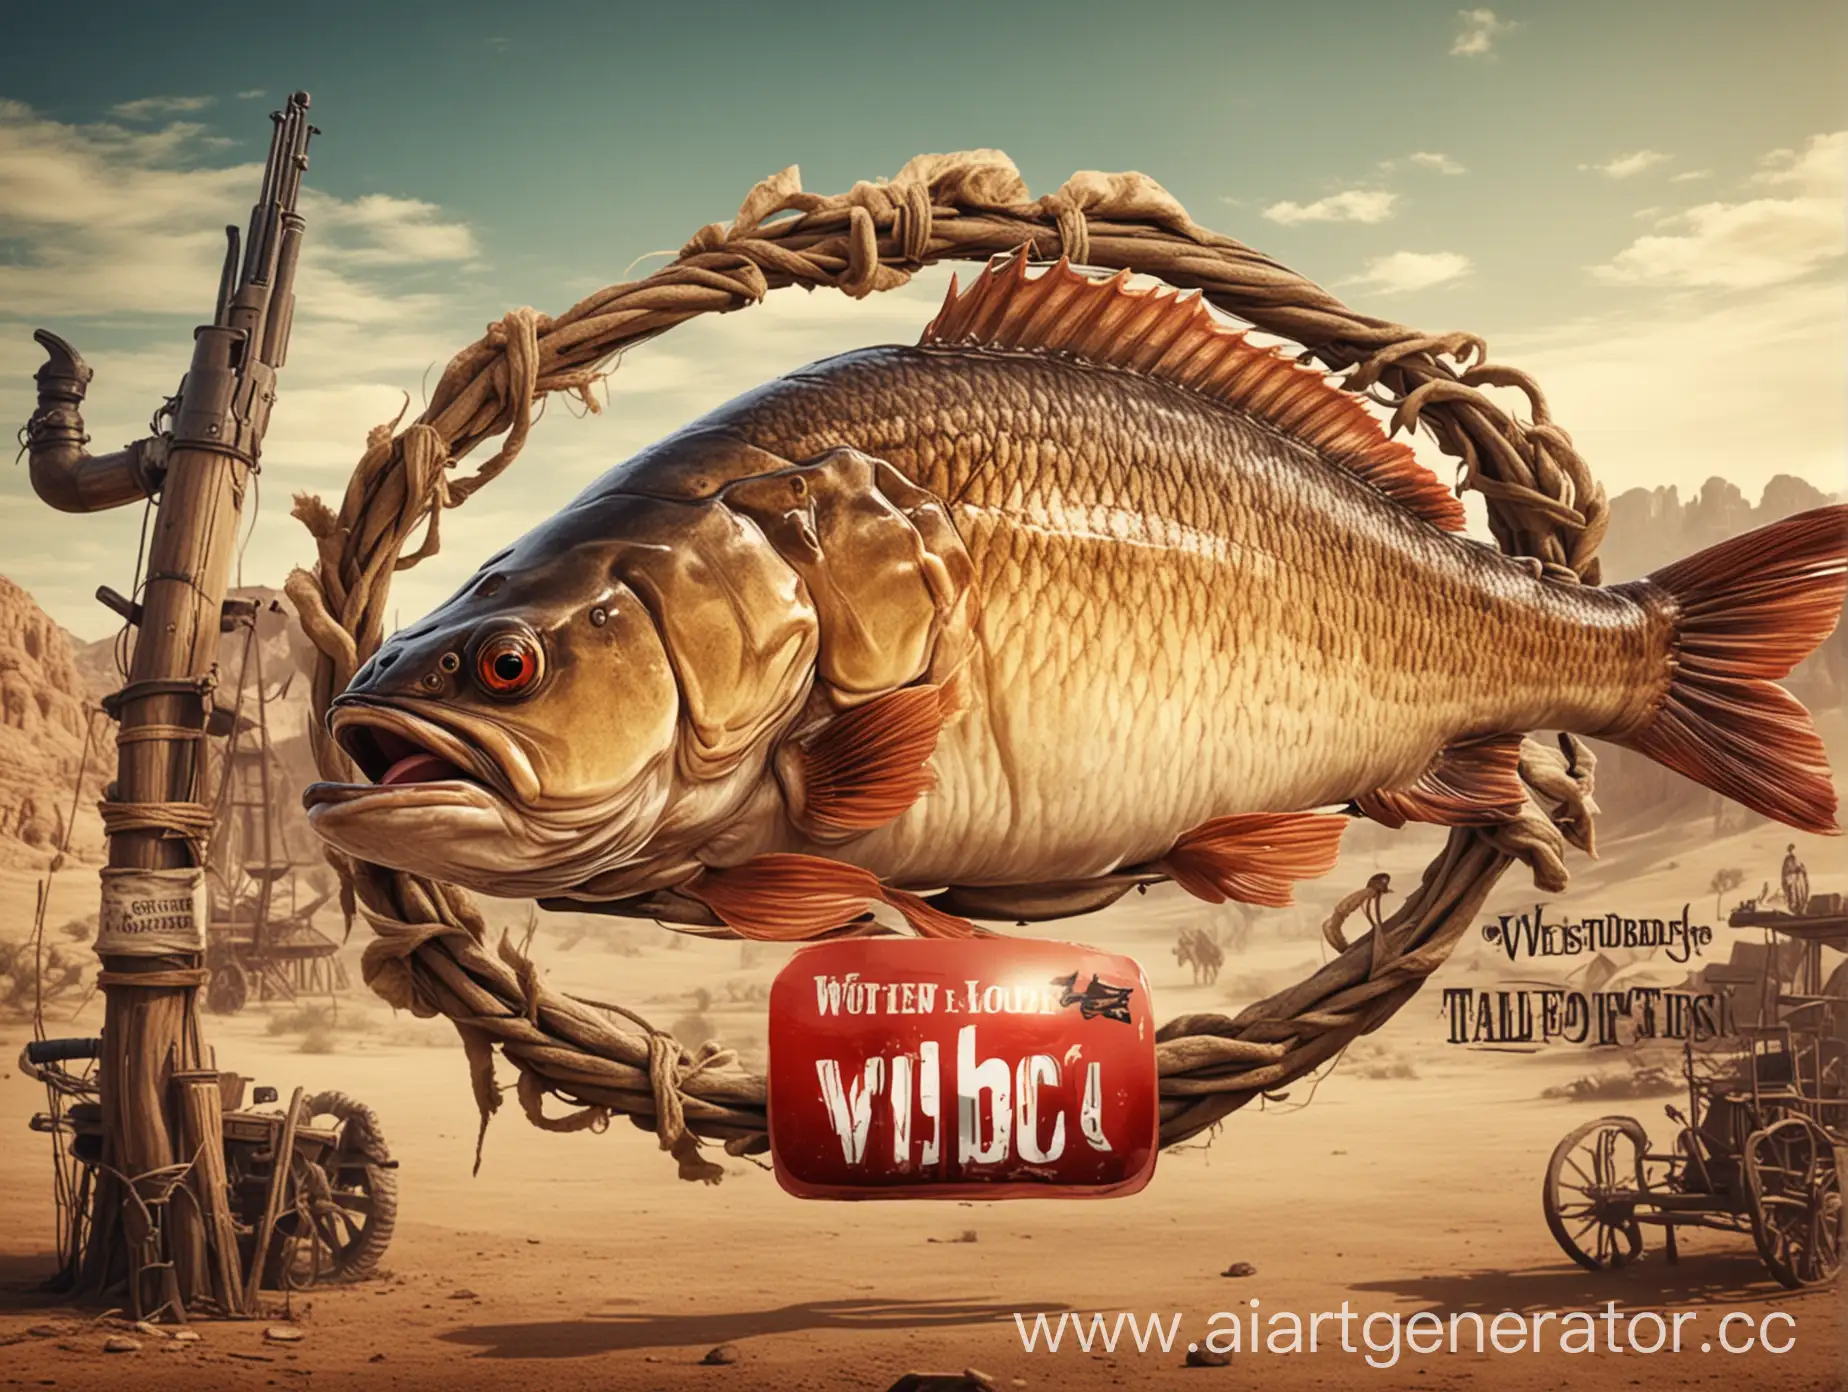 Wild-West-Adventure-Carp-Fishing-Expedition-in-Vintage-Style